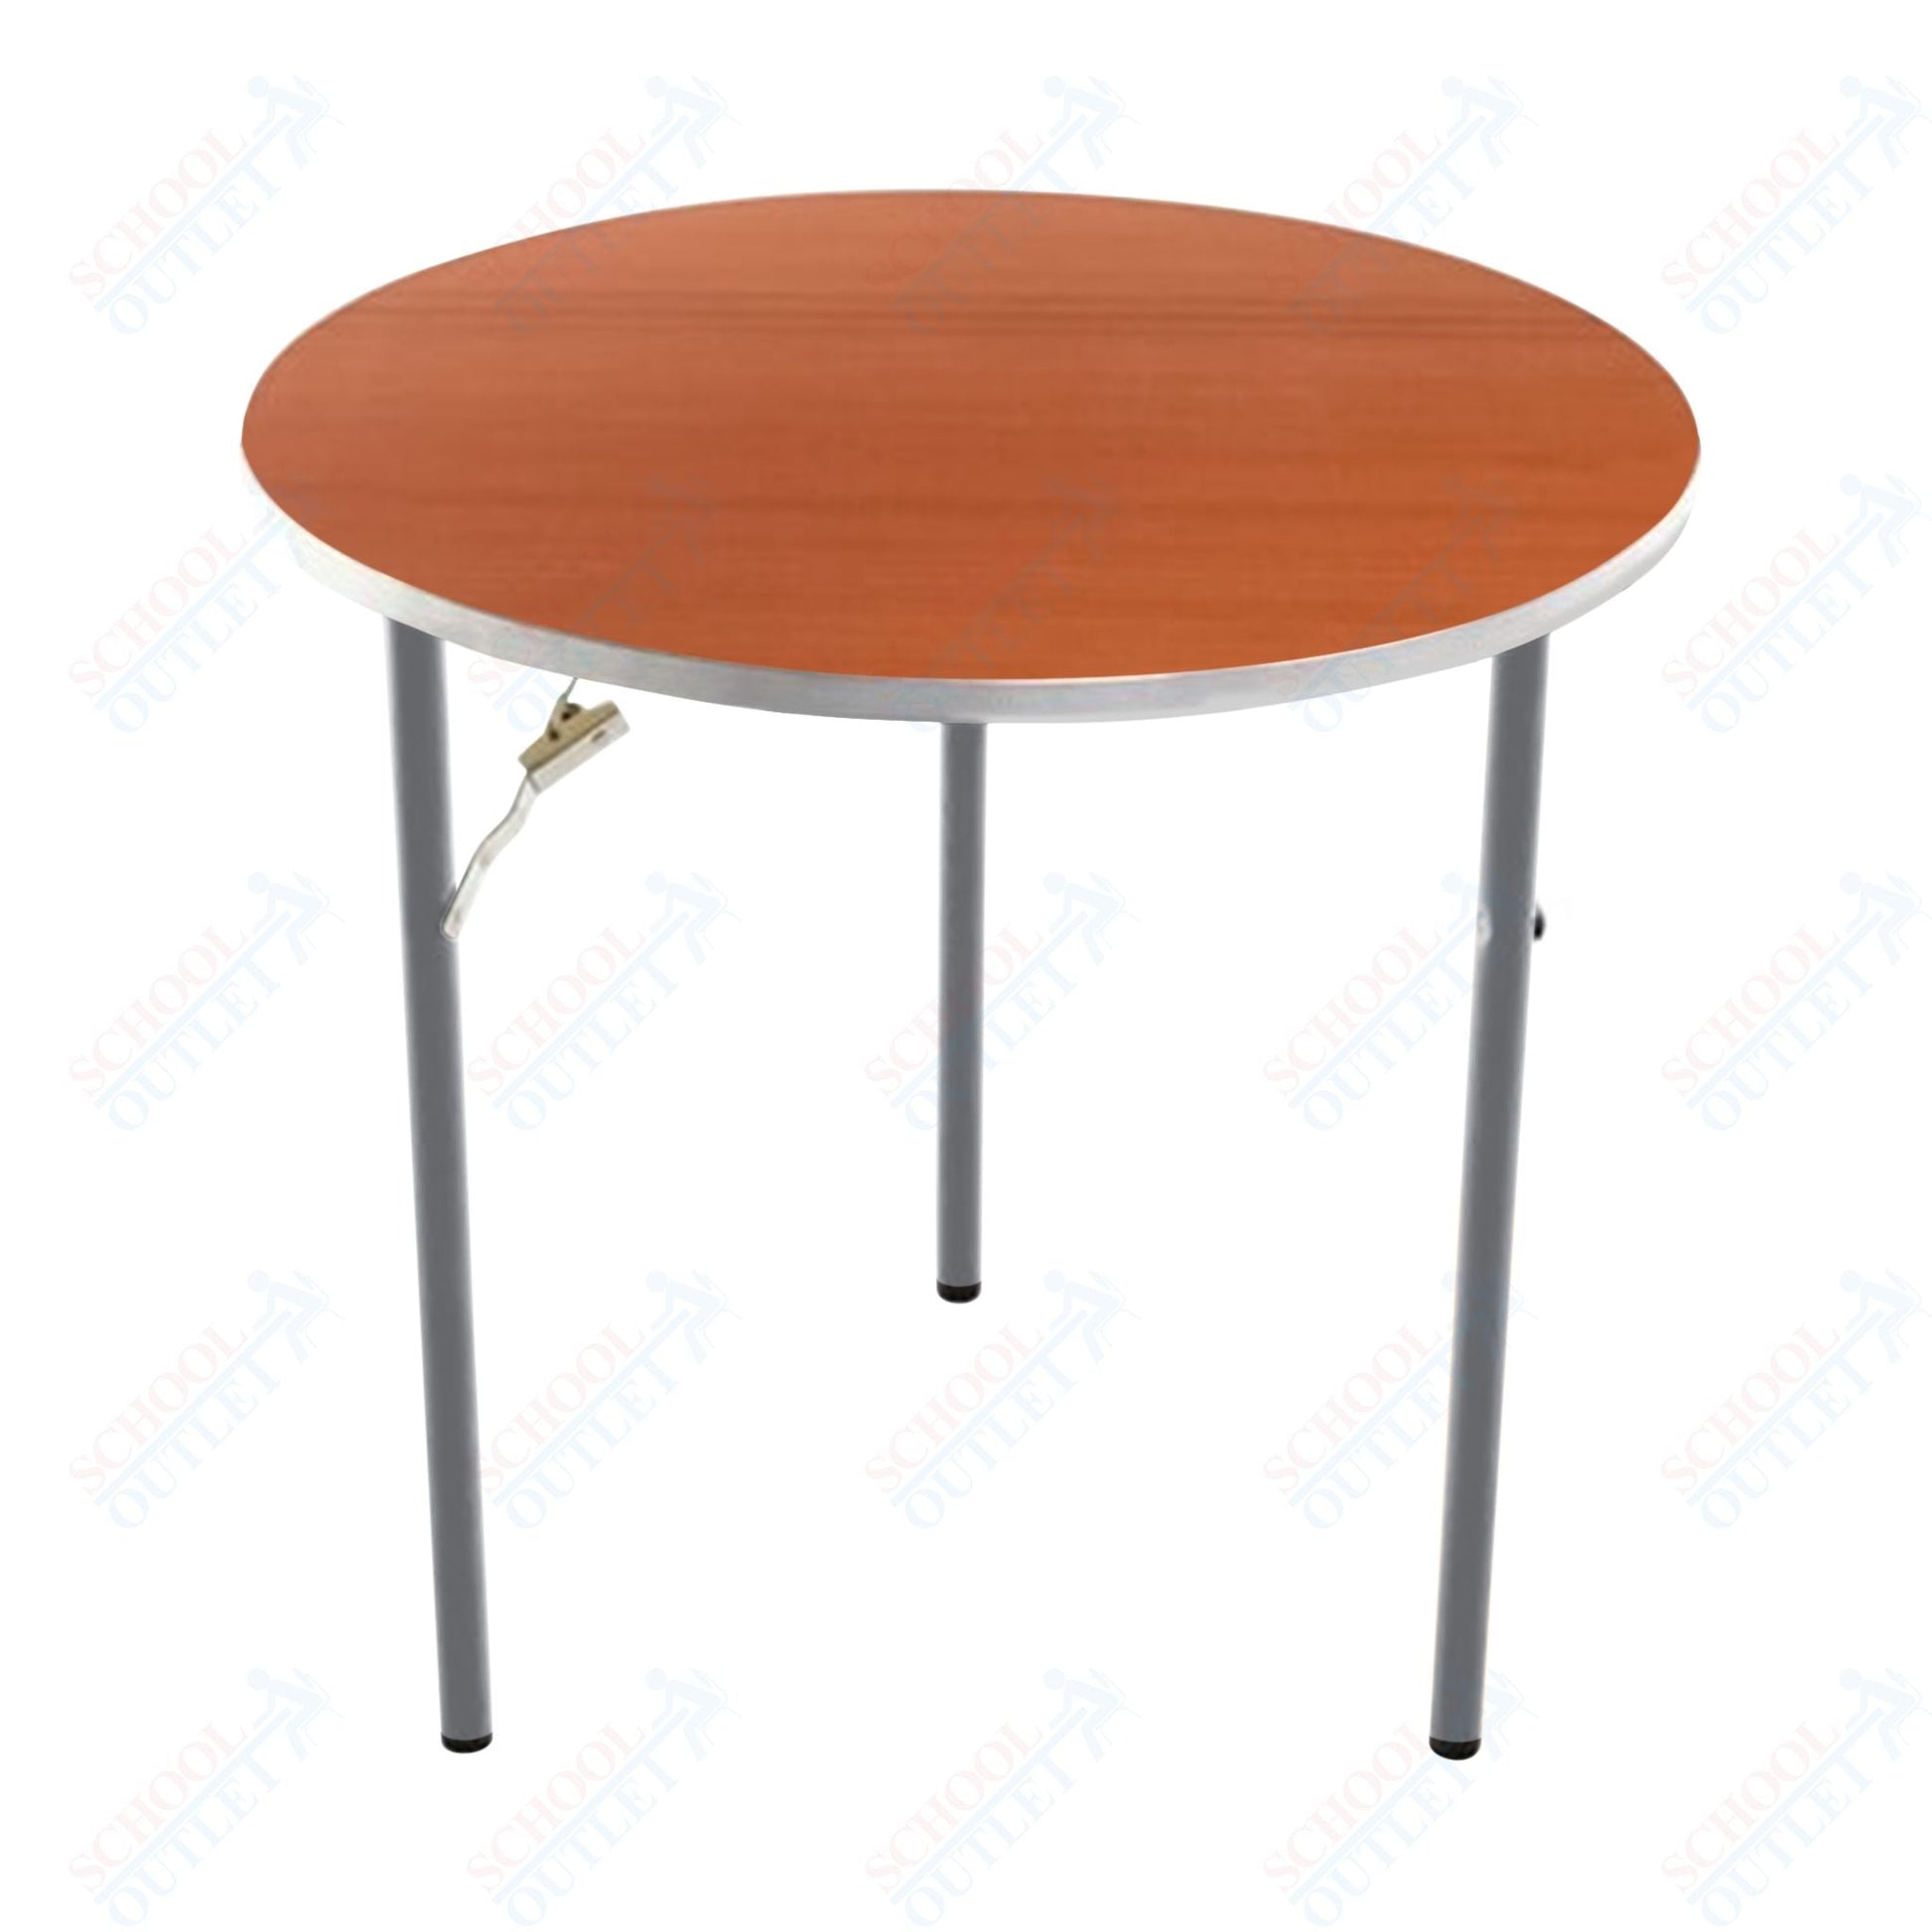 AmTab Folding Table - Plywood Stained and Sealed - Aluminum Edge - Round - 54" Diameter x 29"H (AmTab AMT - R54PA) - SchoolOutlet